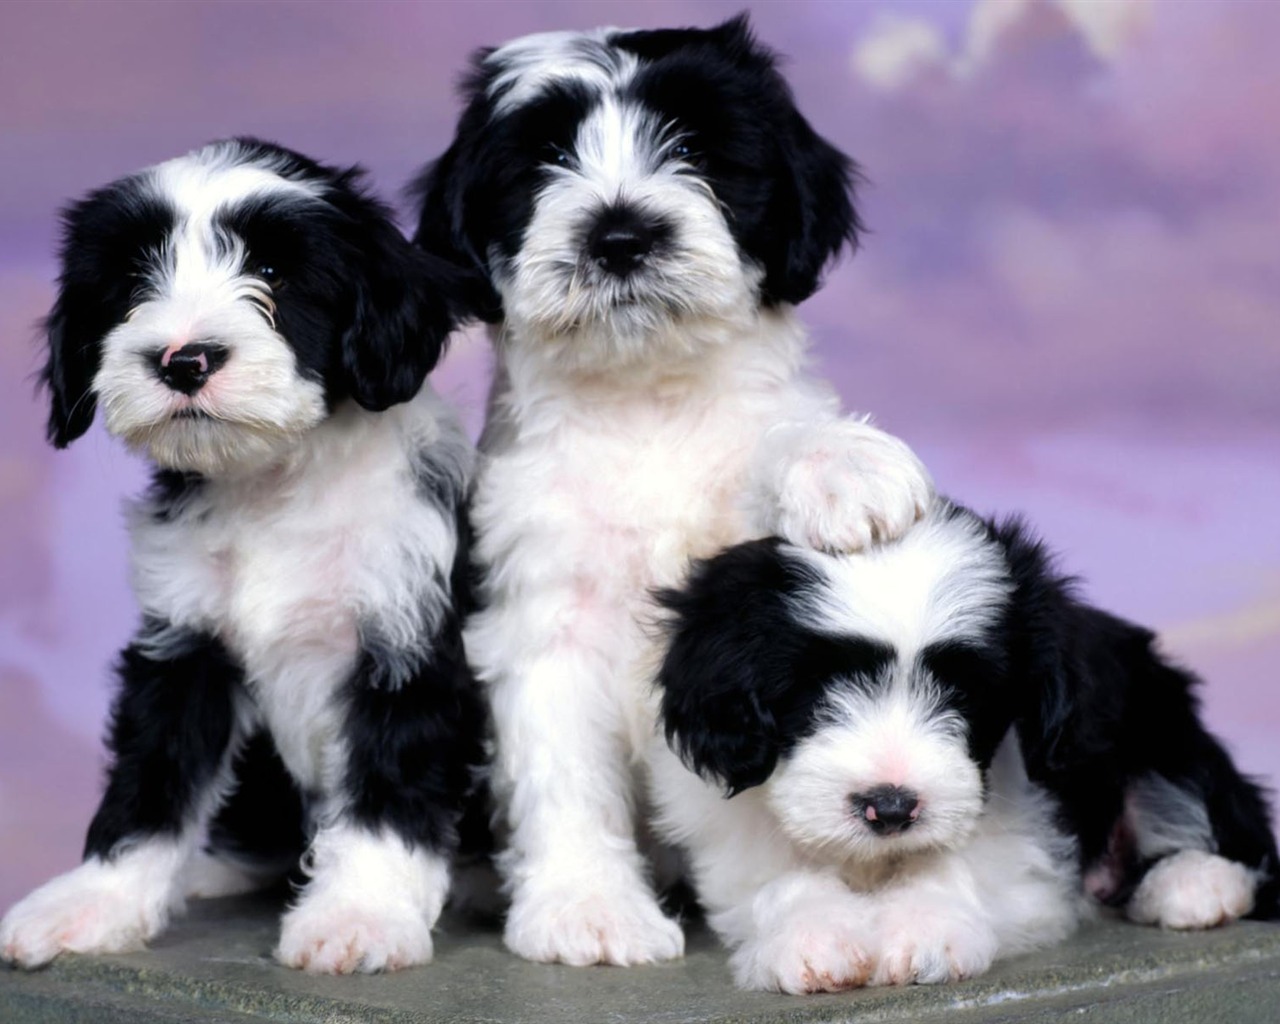 Puppy Photo HD wallpapers (1) #19 - 1280x1024